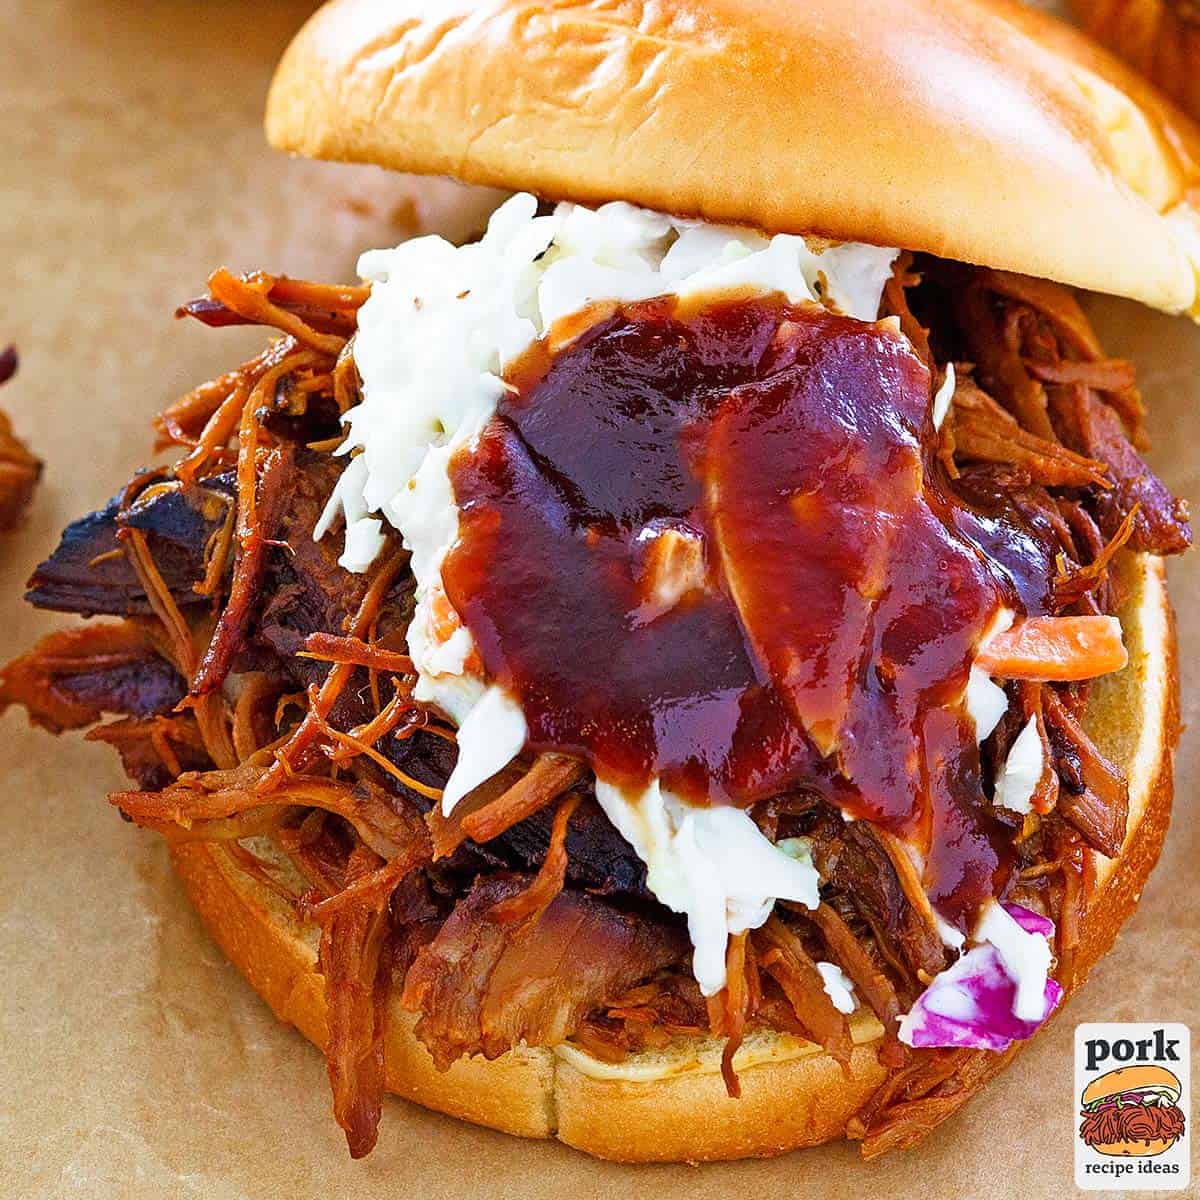 a pulled pork sandwich with coleslaw and barbecue sauce